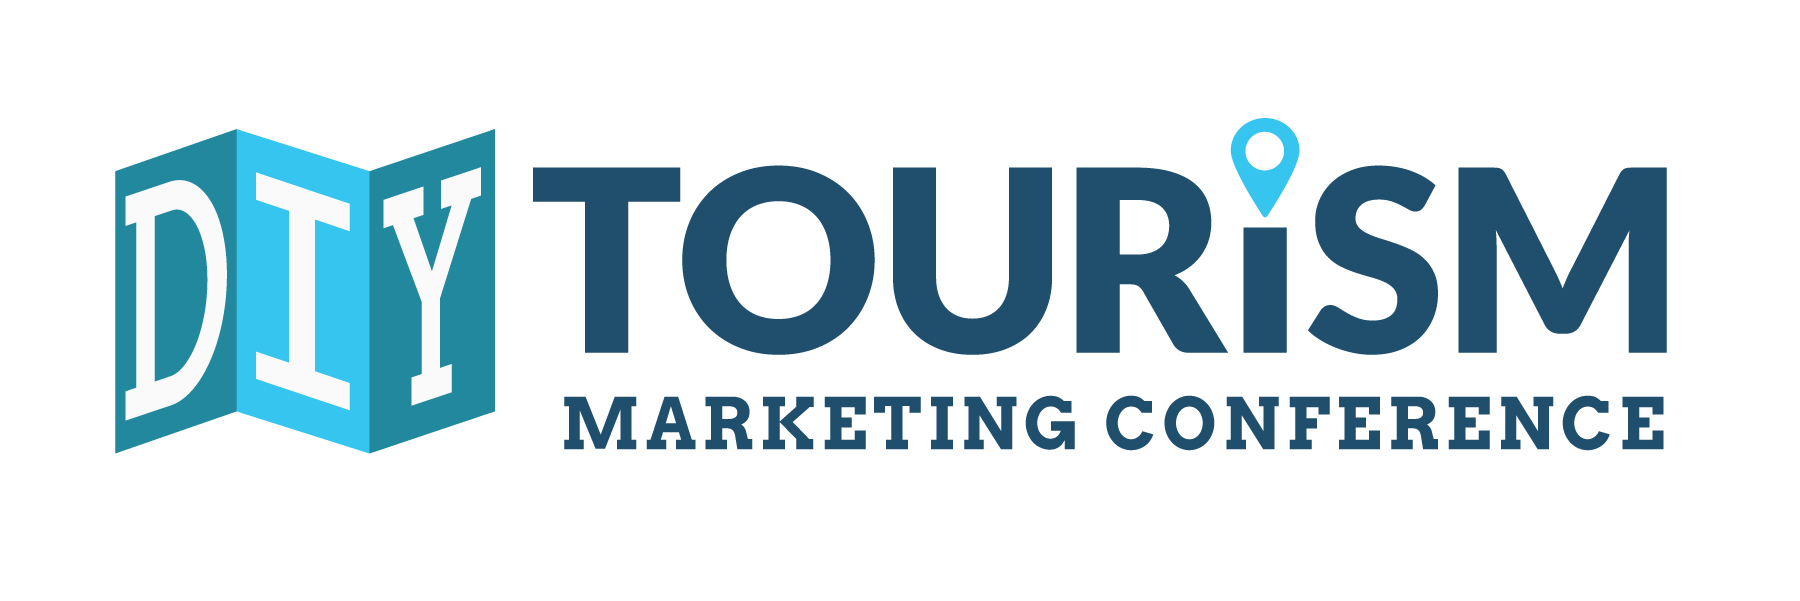 Attend the DIY Tourism Marketing Conference in Asheville, NC